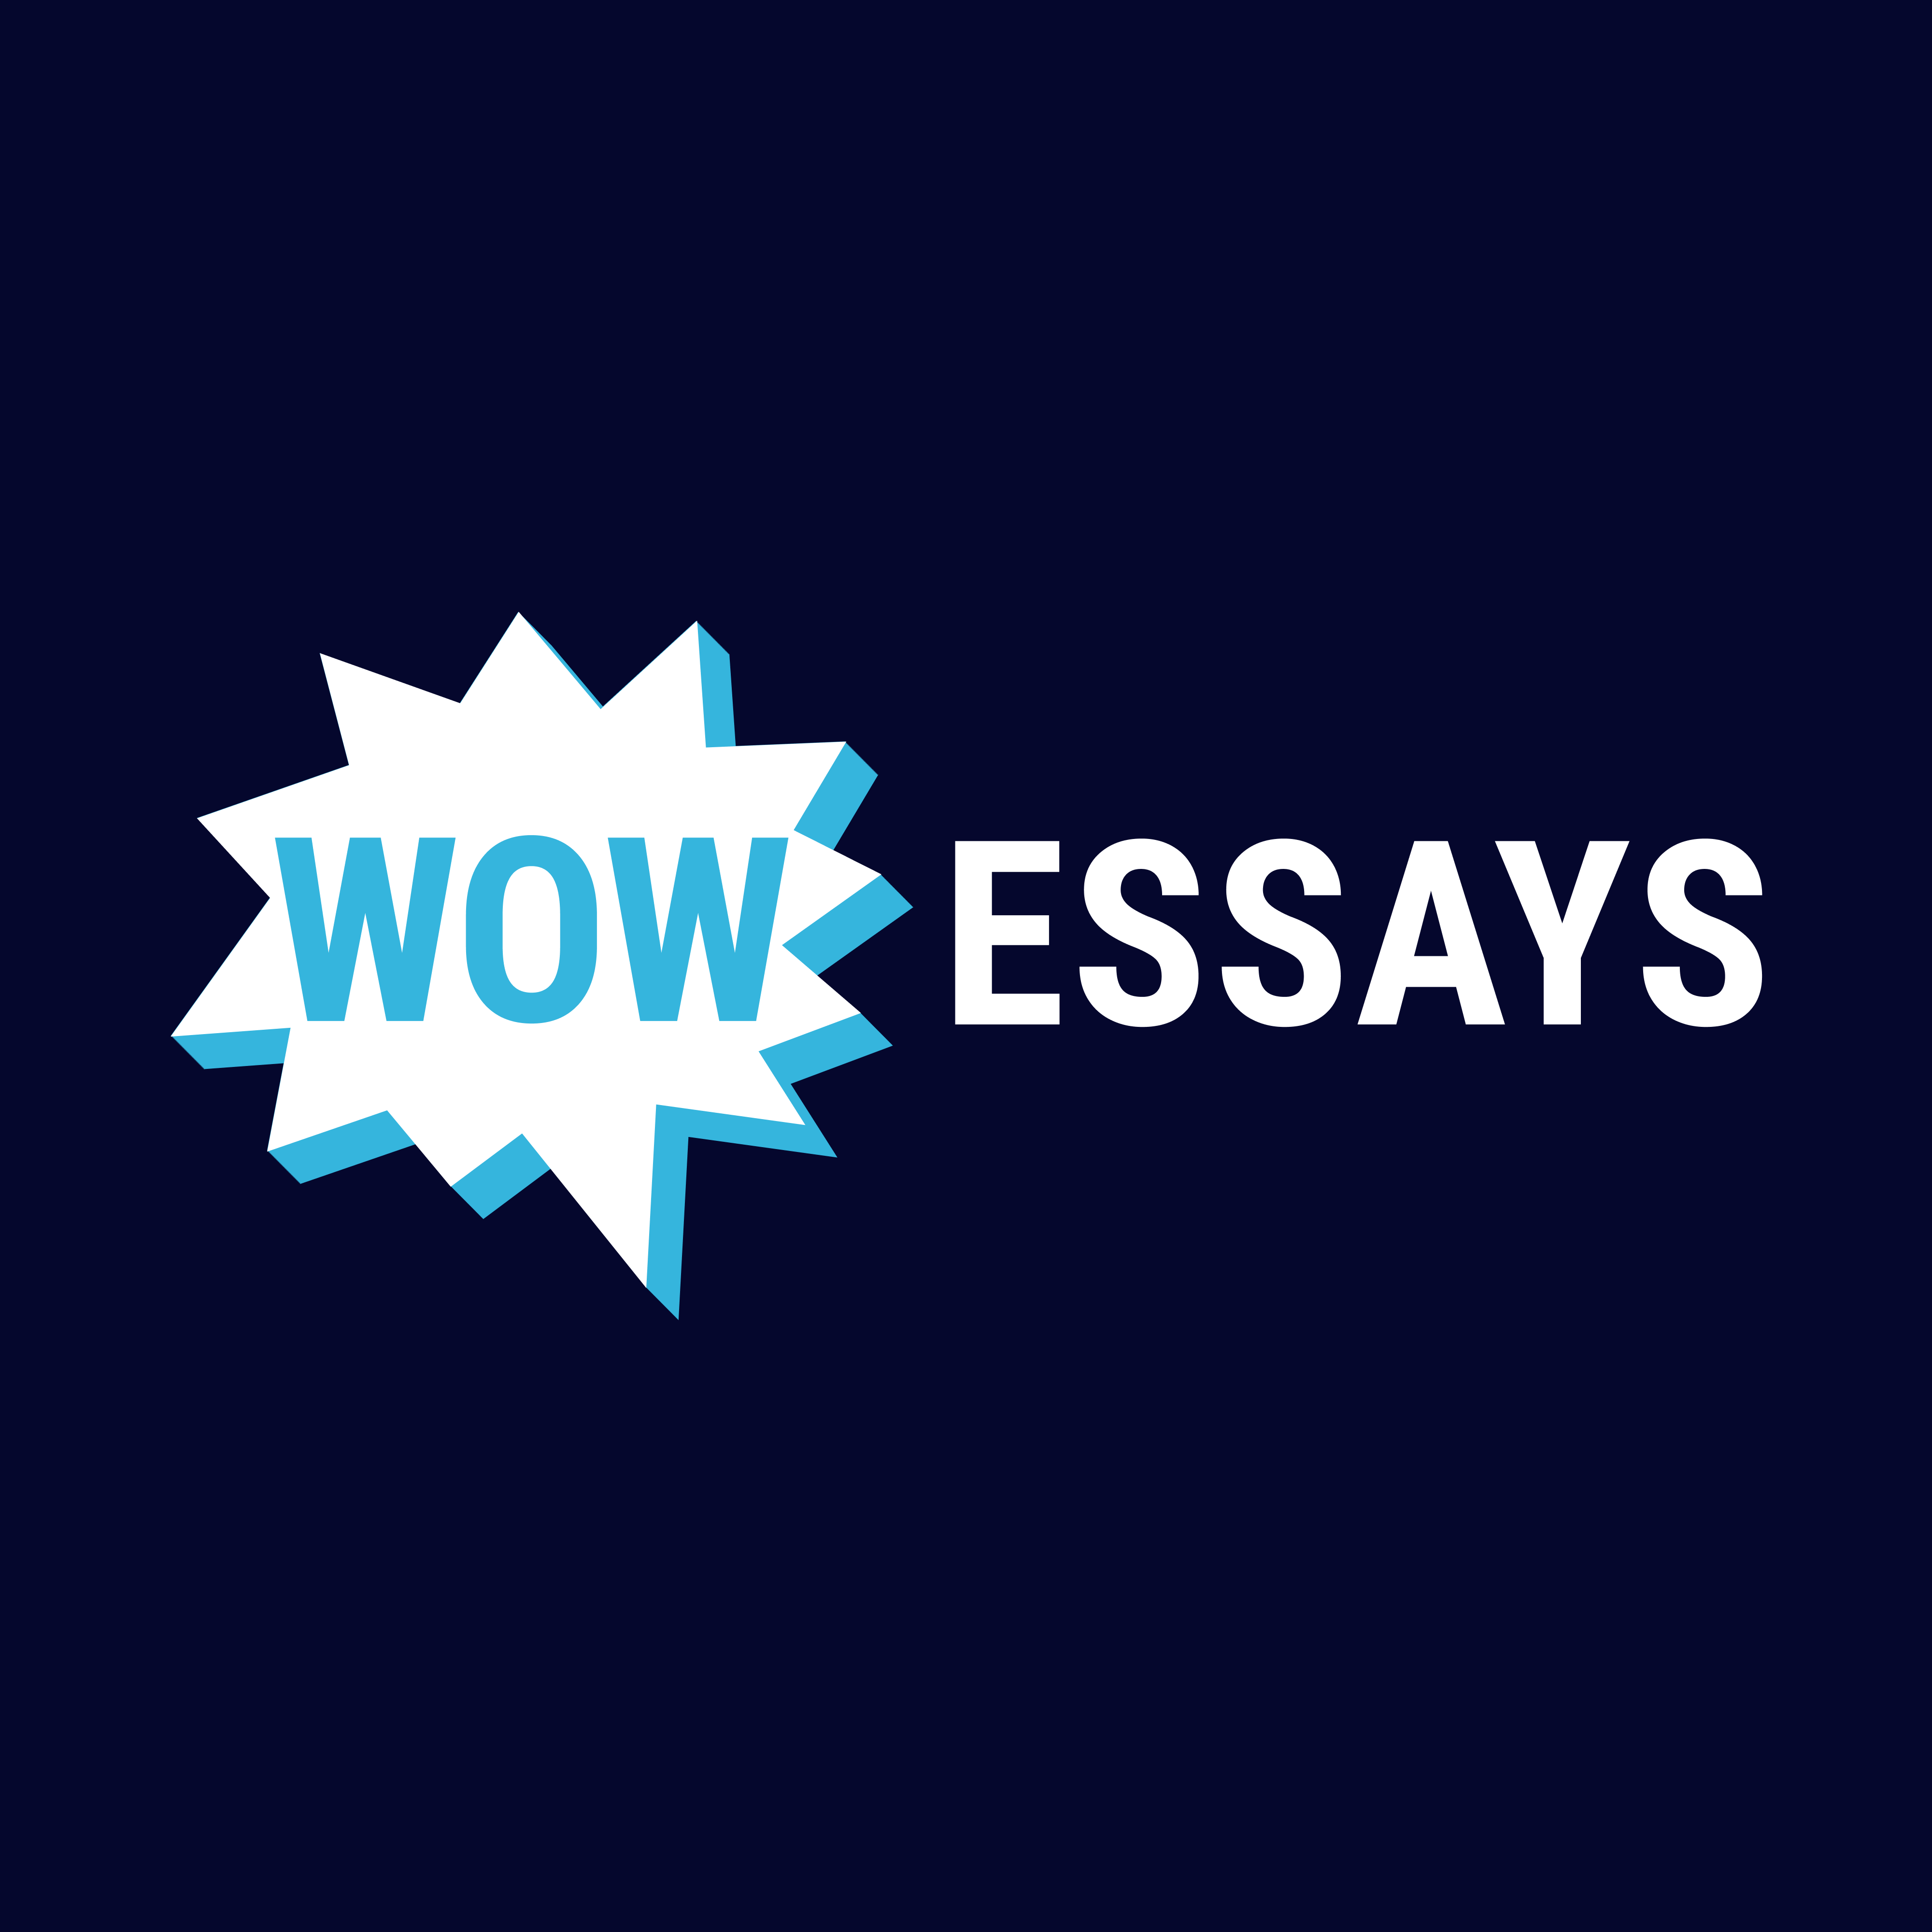 Essay writing help free examples